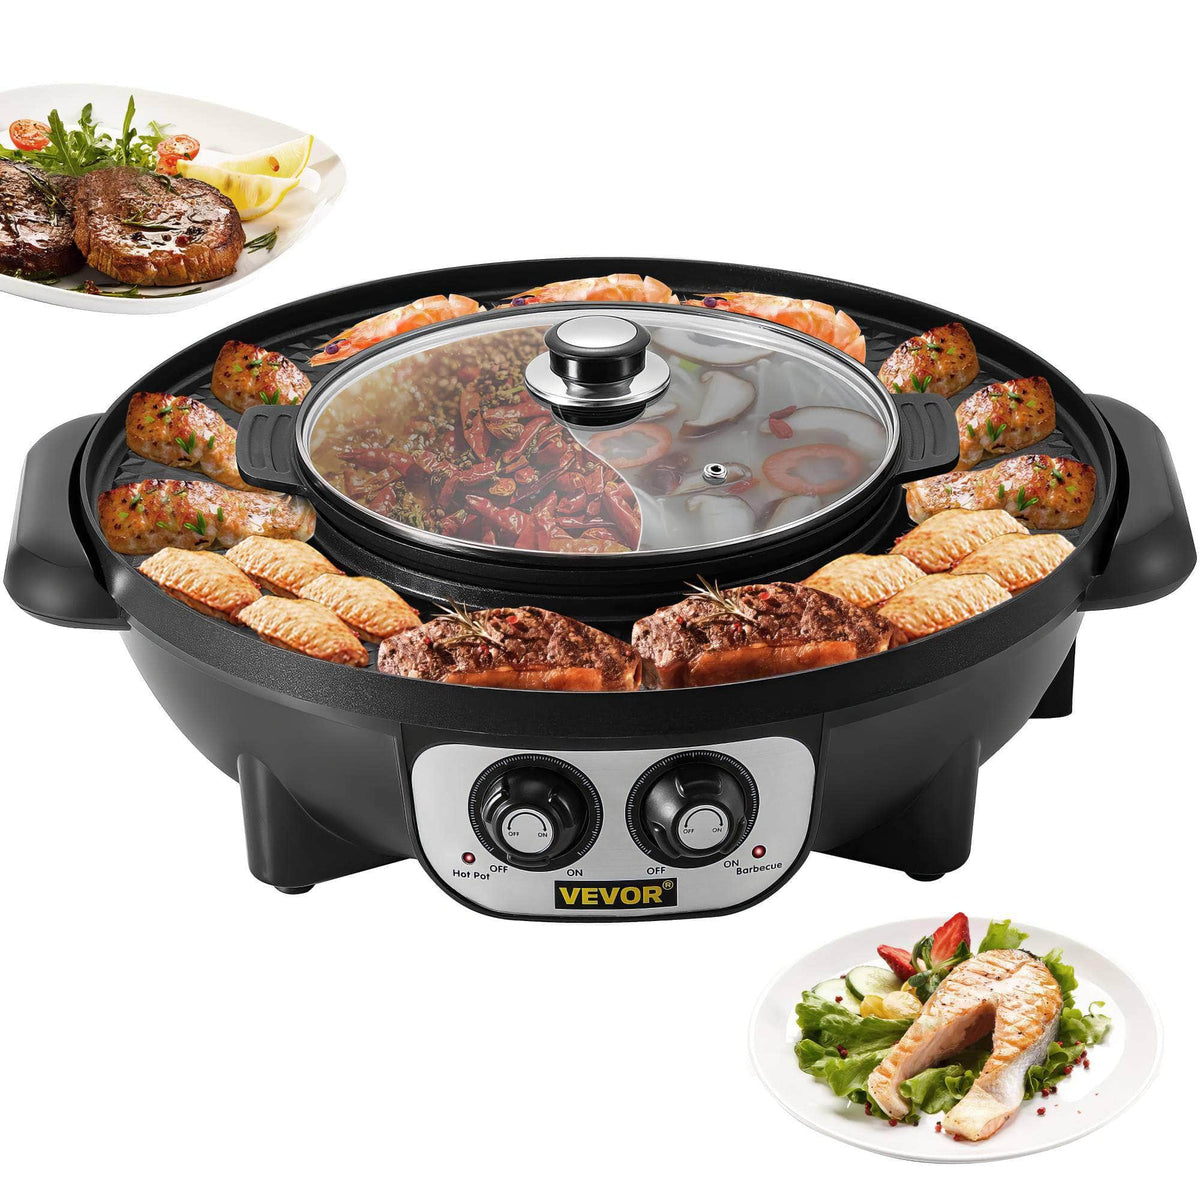 VEVOR 2 in 1 Electric Hot Pot BBQ Grill - 2200W Multifunction, Portable Non-Stick, Split Pot for Home, Smokeless Skillet Barbecue Pan